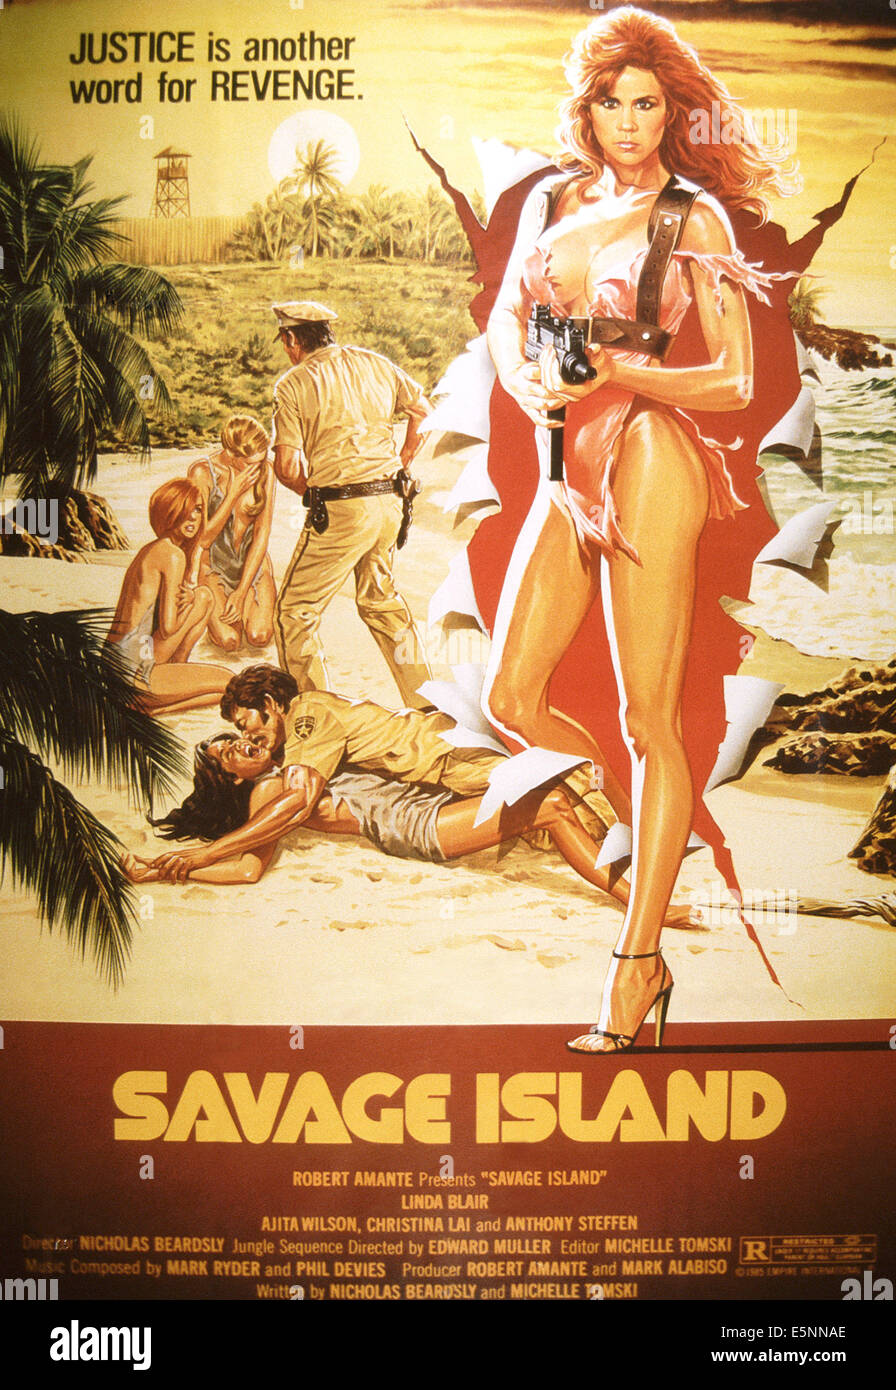 SAVAGE ISLAND, US poster art, Linda Blair, 1985. ©Empire Pictures/courtesy Everett Collection Stock Photo